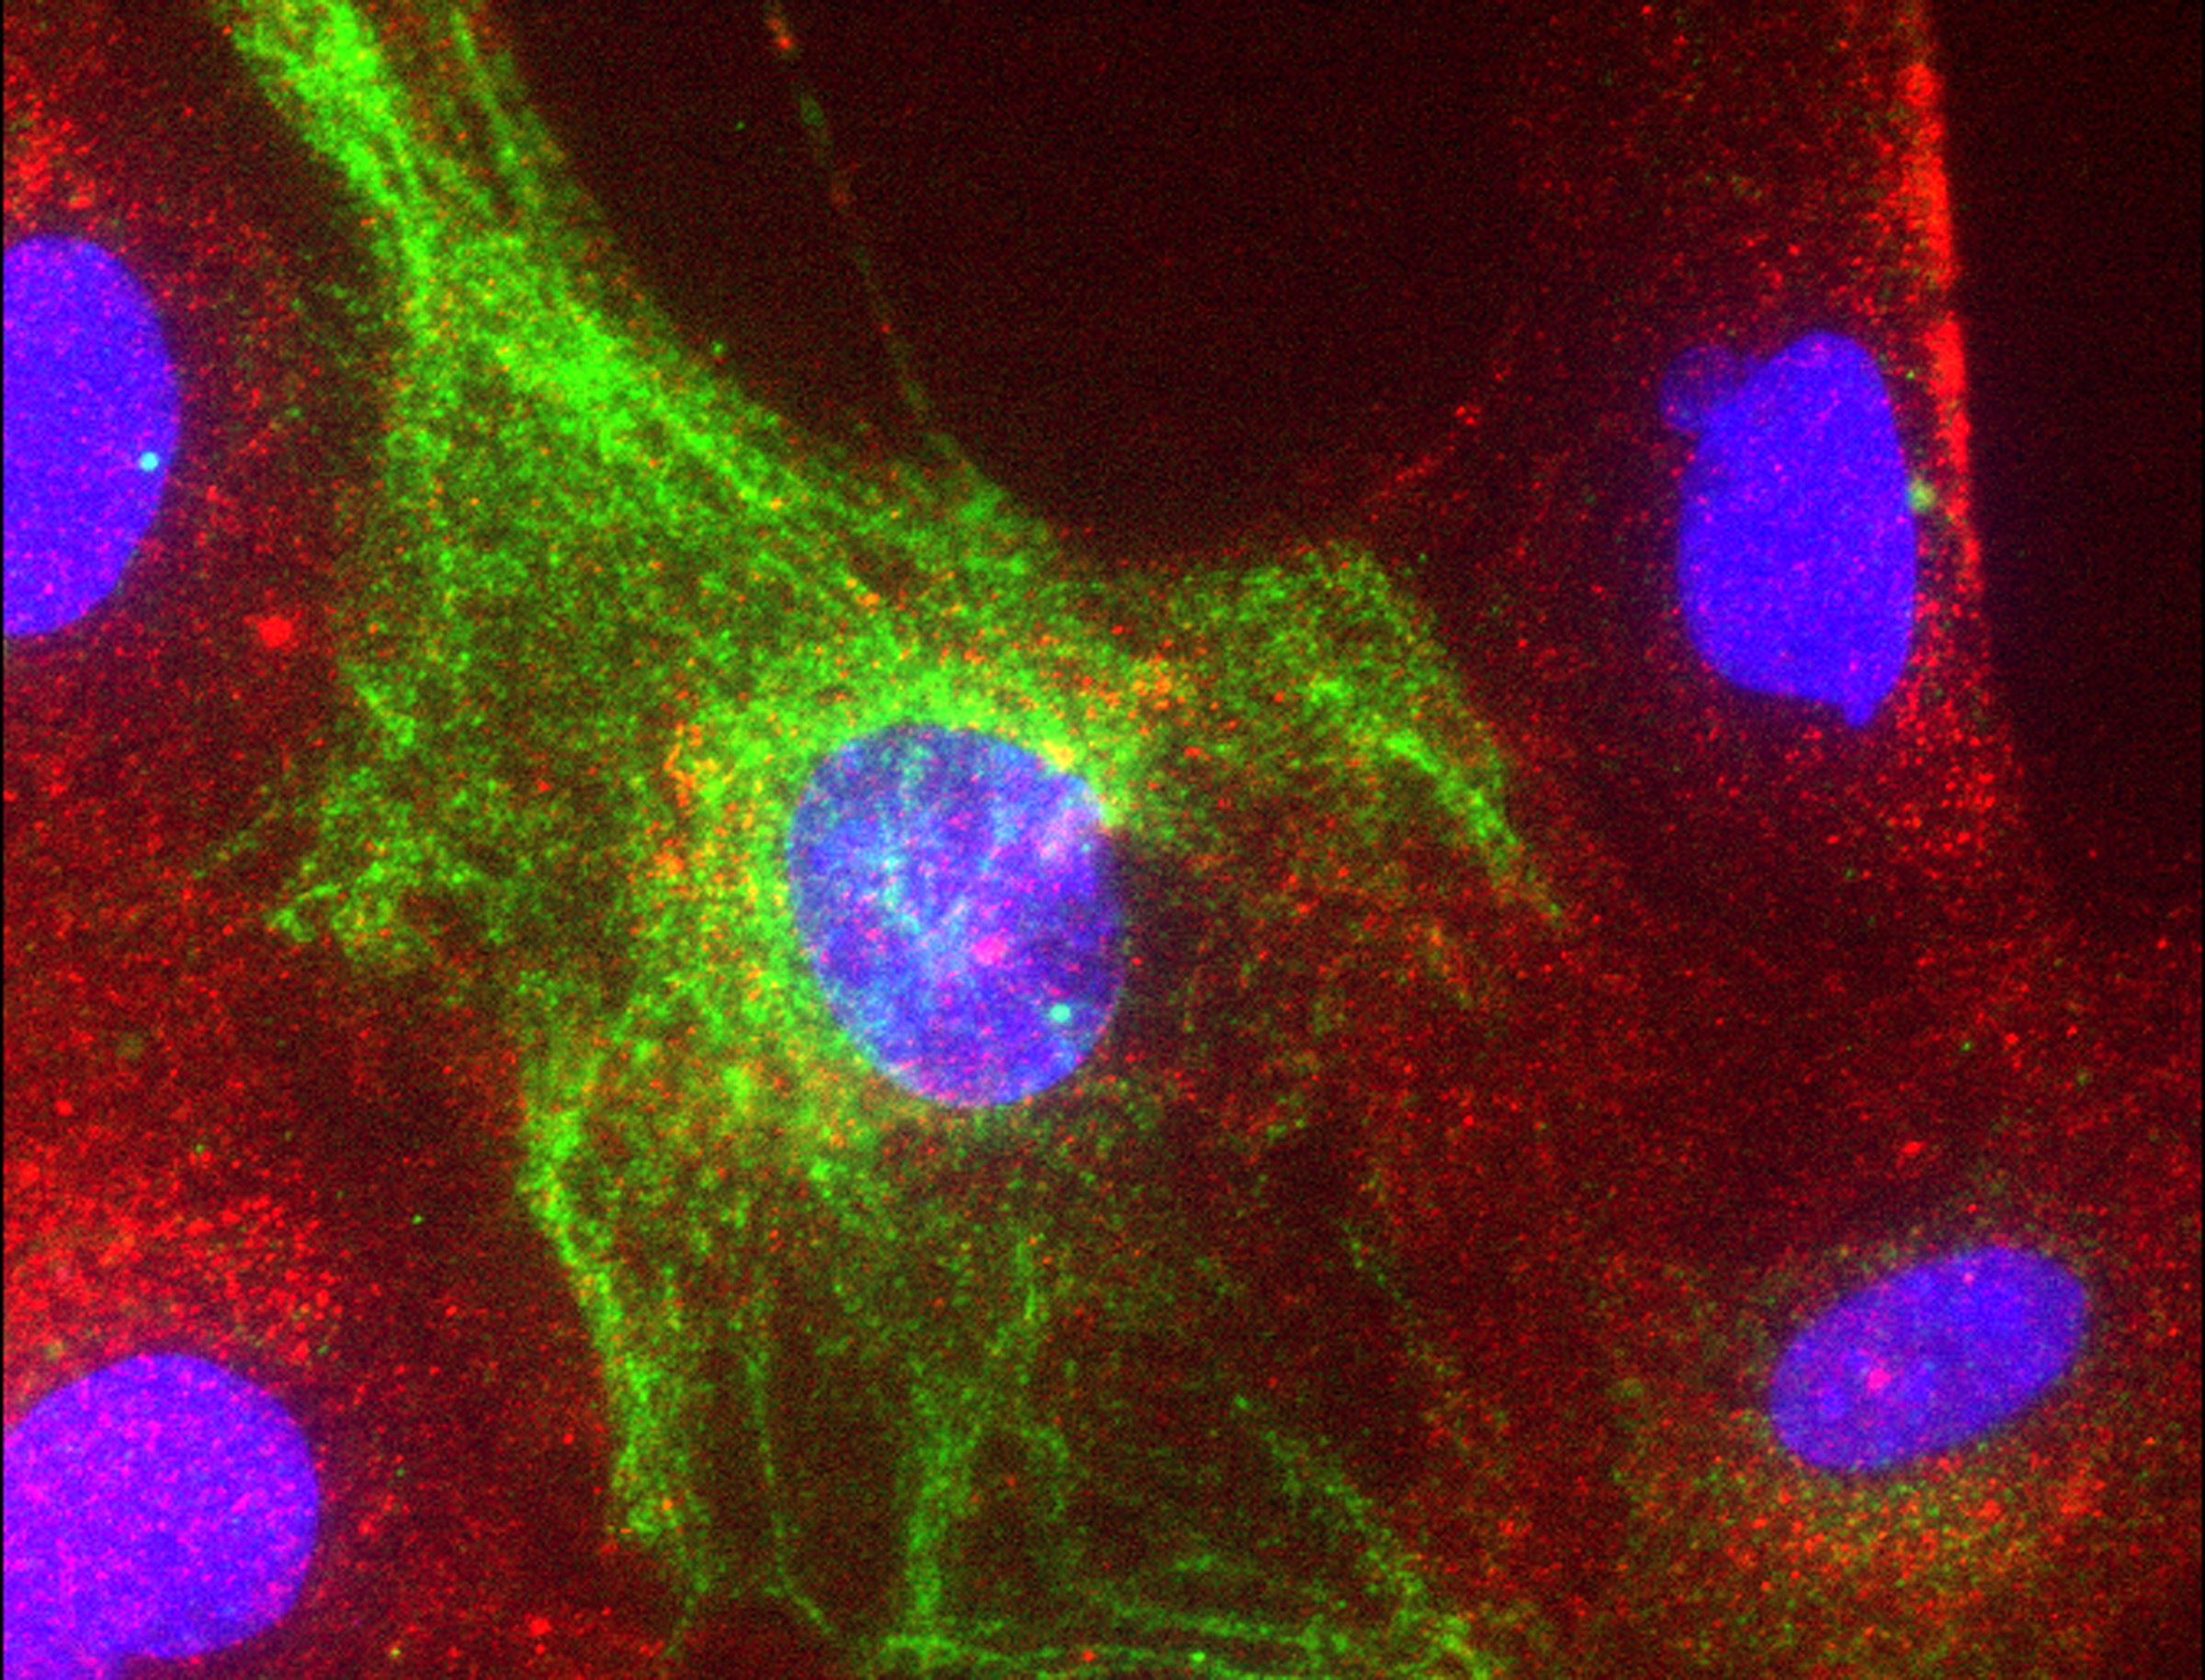 Cells developed by the Capecchi lab. Red areas represent the ews-at  fusion gene, that initiates the process leading to Clear Cell Sarcoma tumors. Green areas represent Nestin, a stem cell marker.